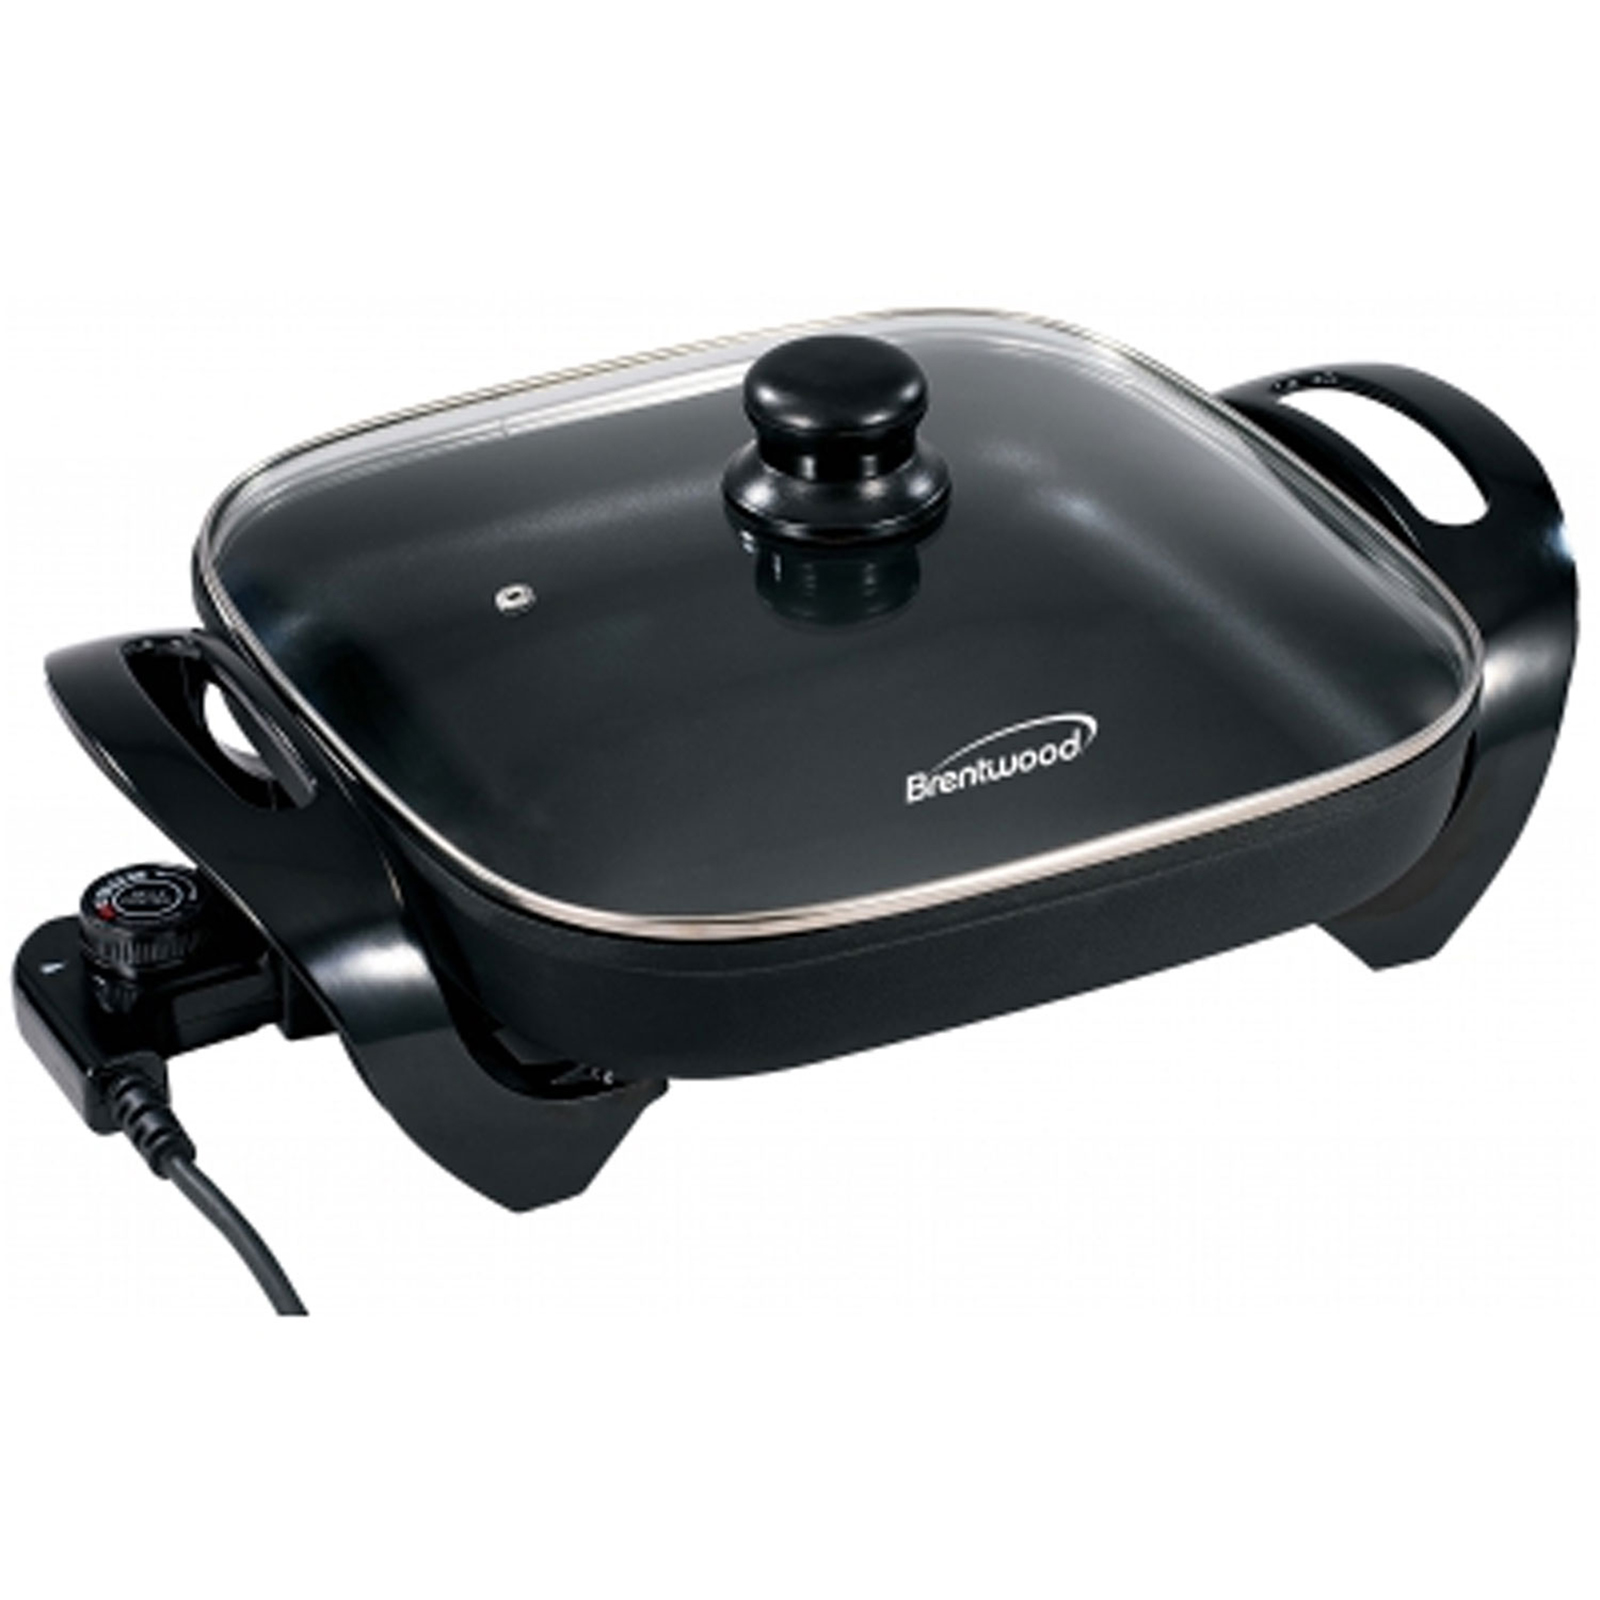 Brentwood 97083213M 12" Electric Skillet with Glass Lid - Black